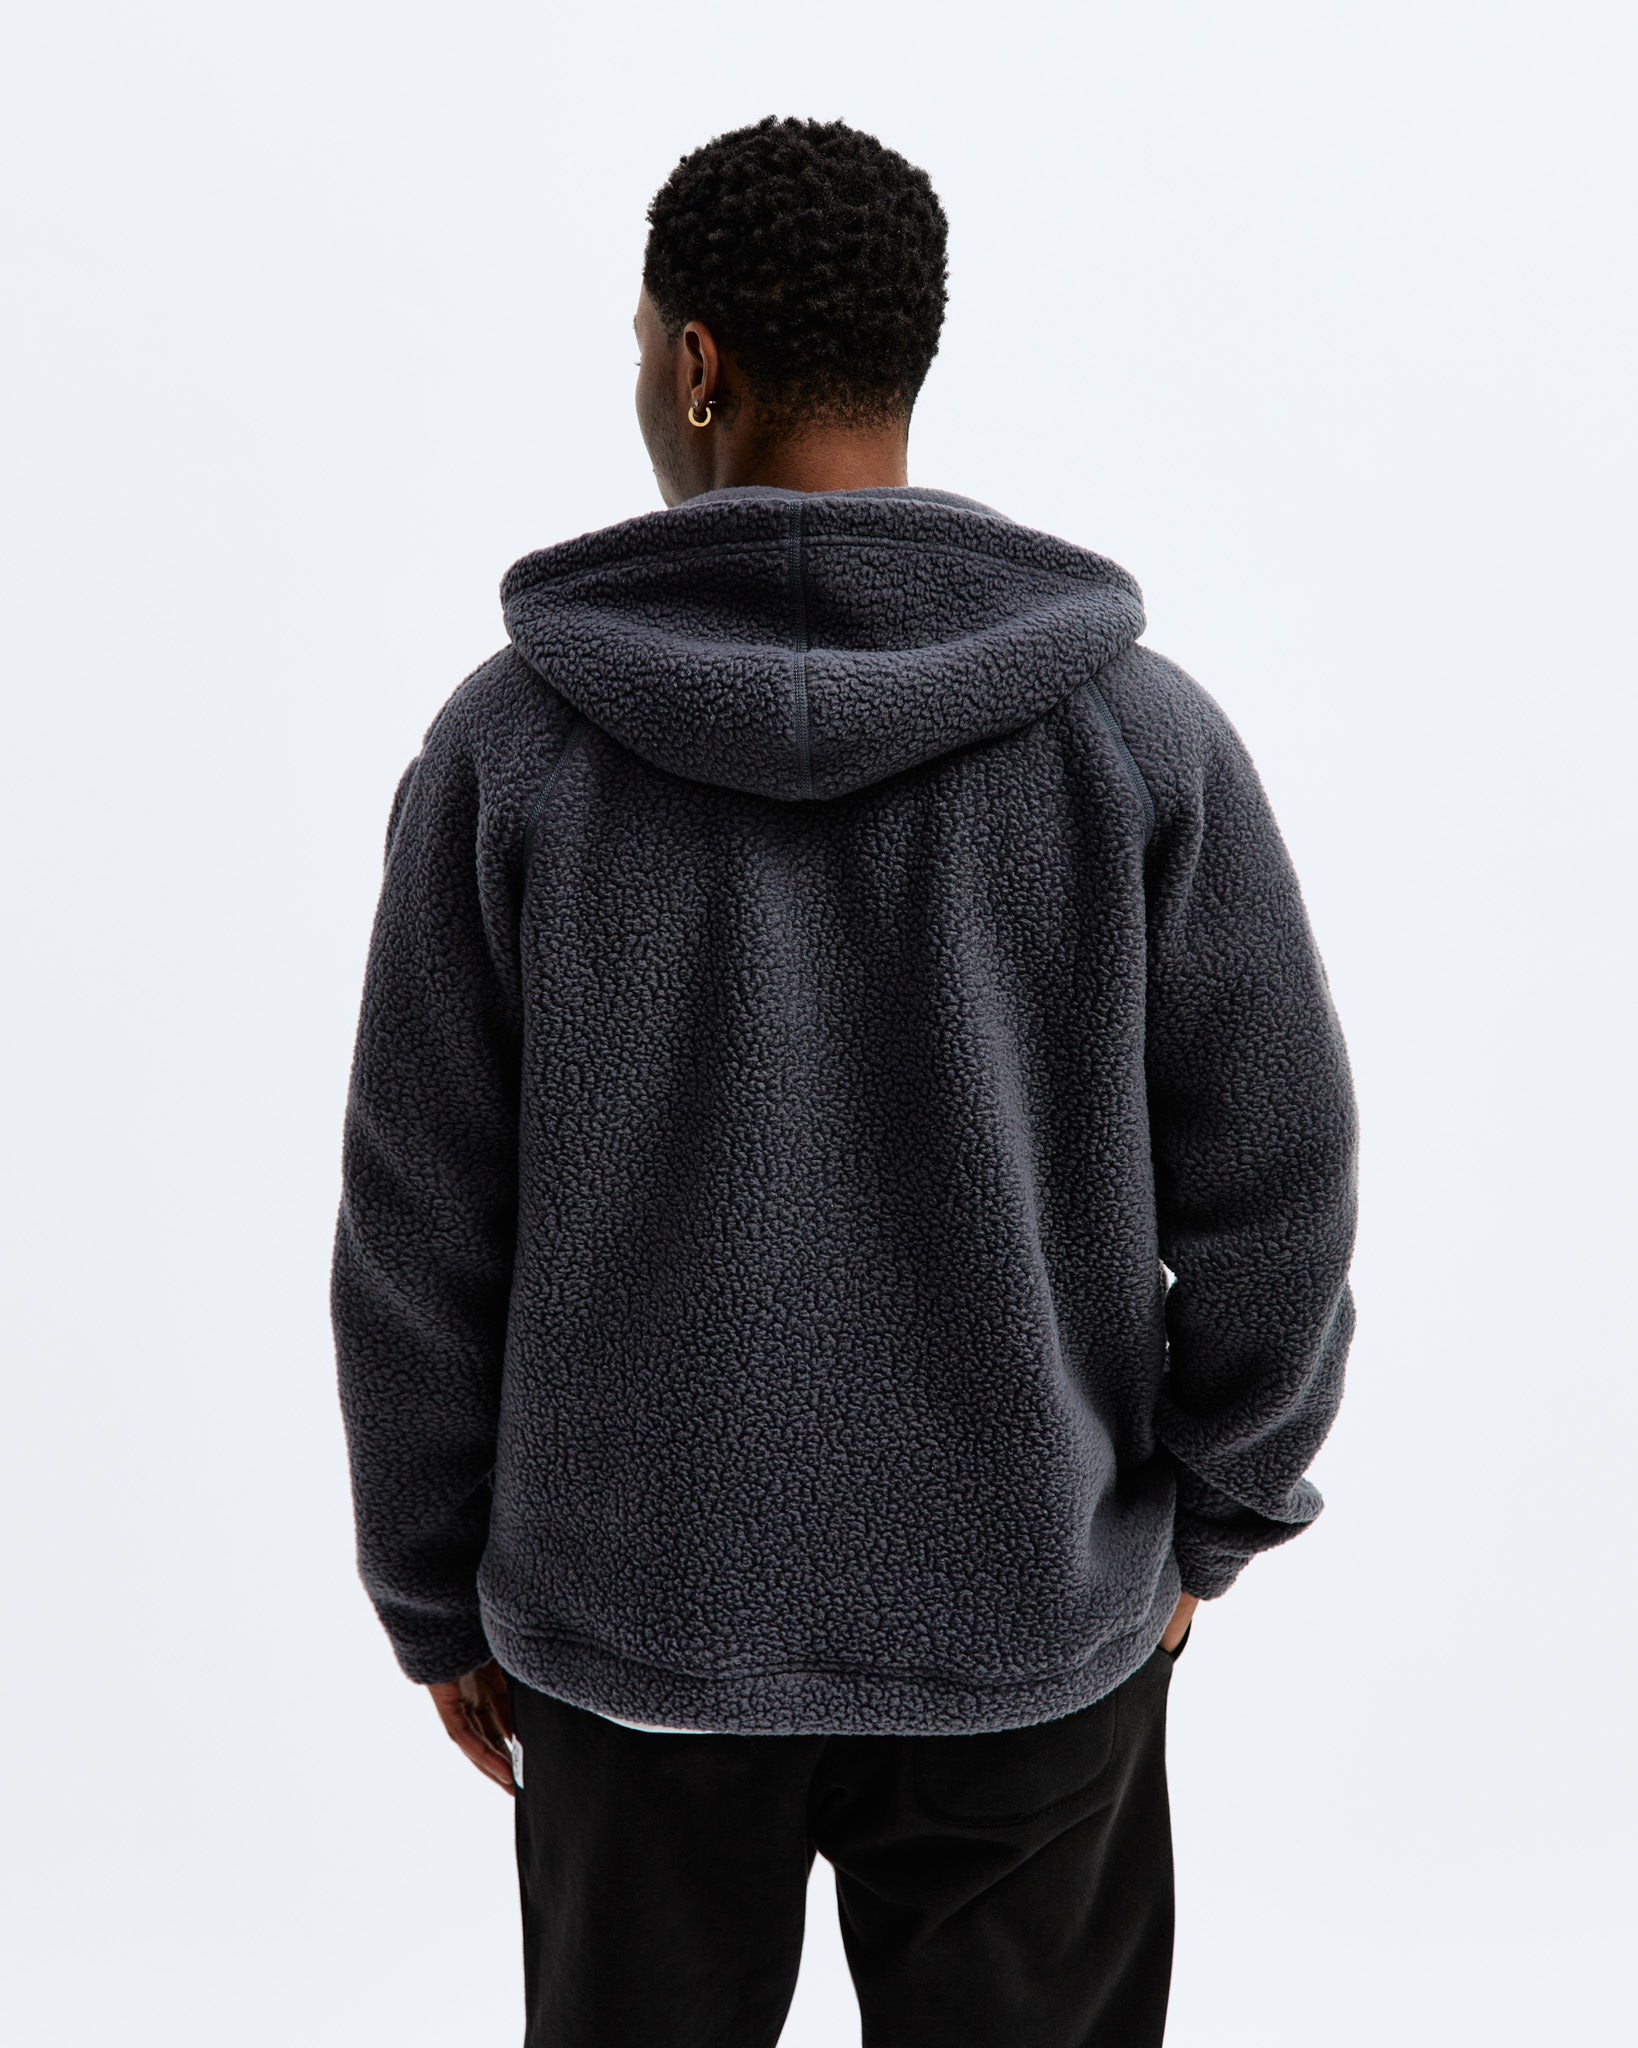 Polartec Thermal Pro Full Zip Hoodie | Reigning Champ